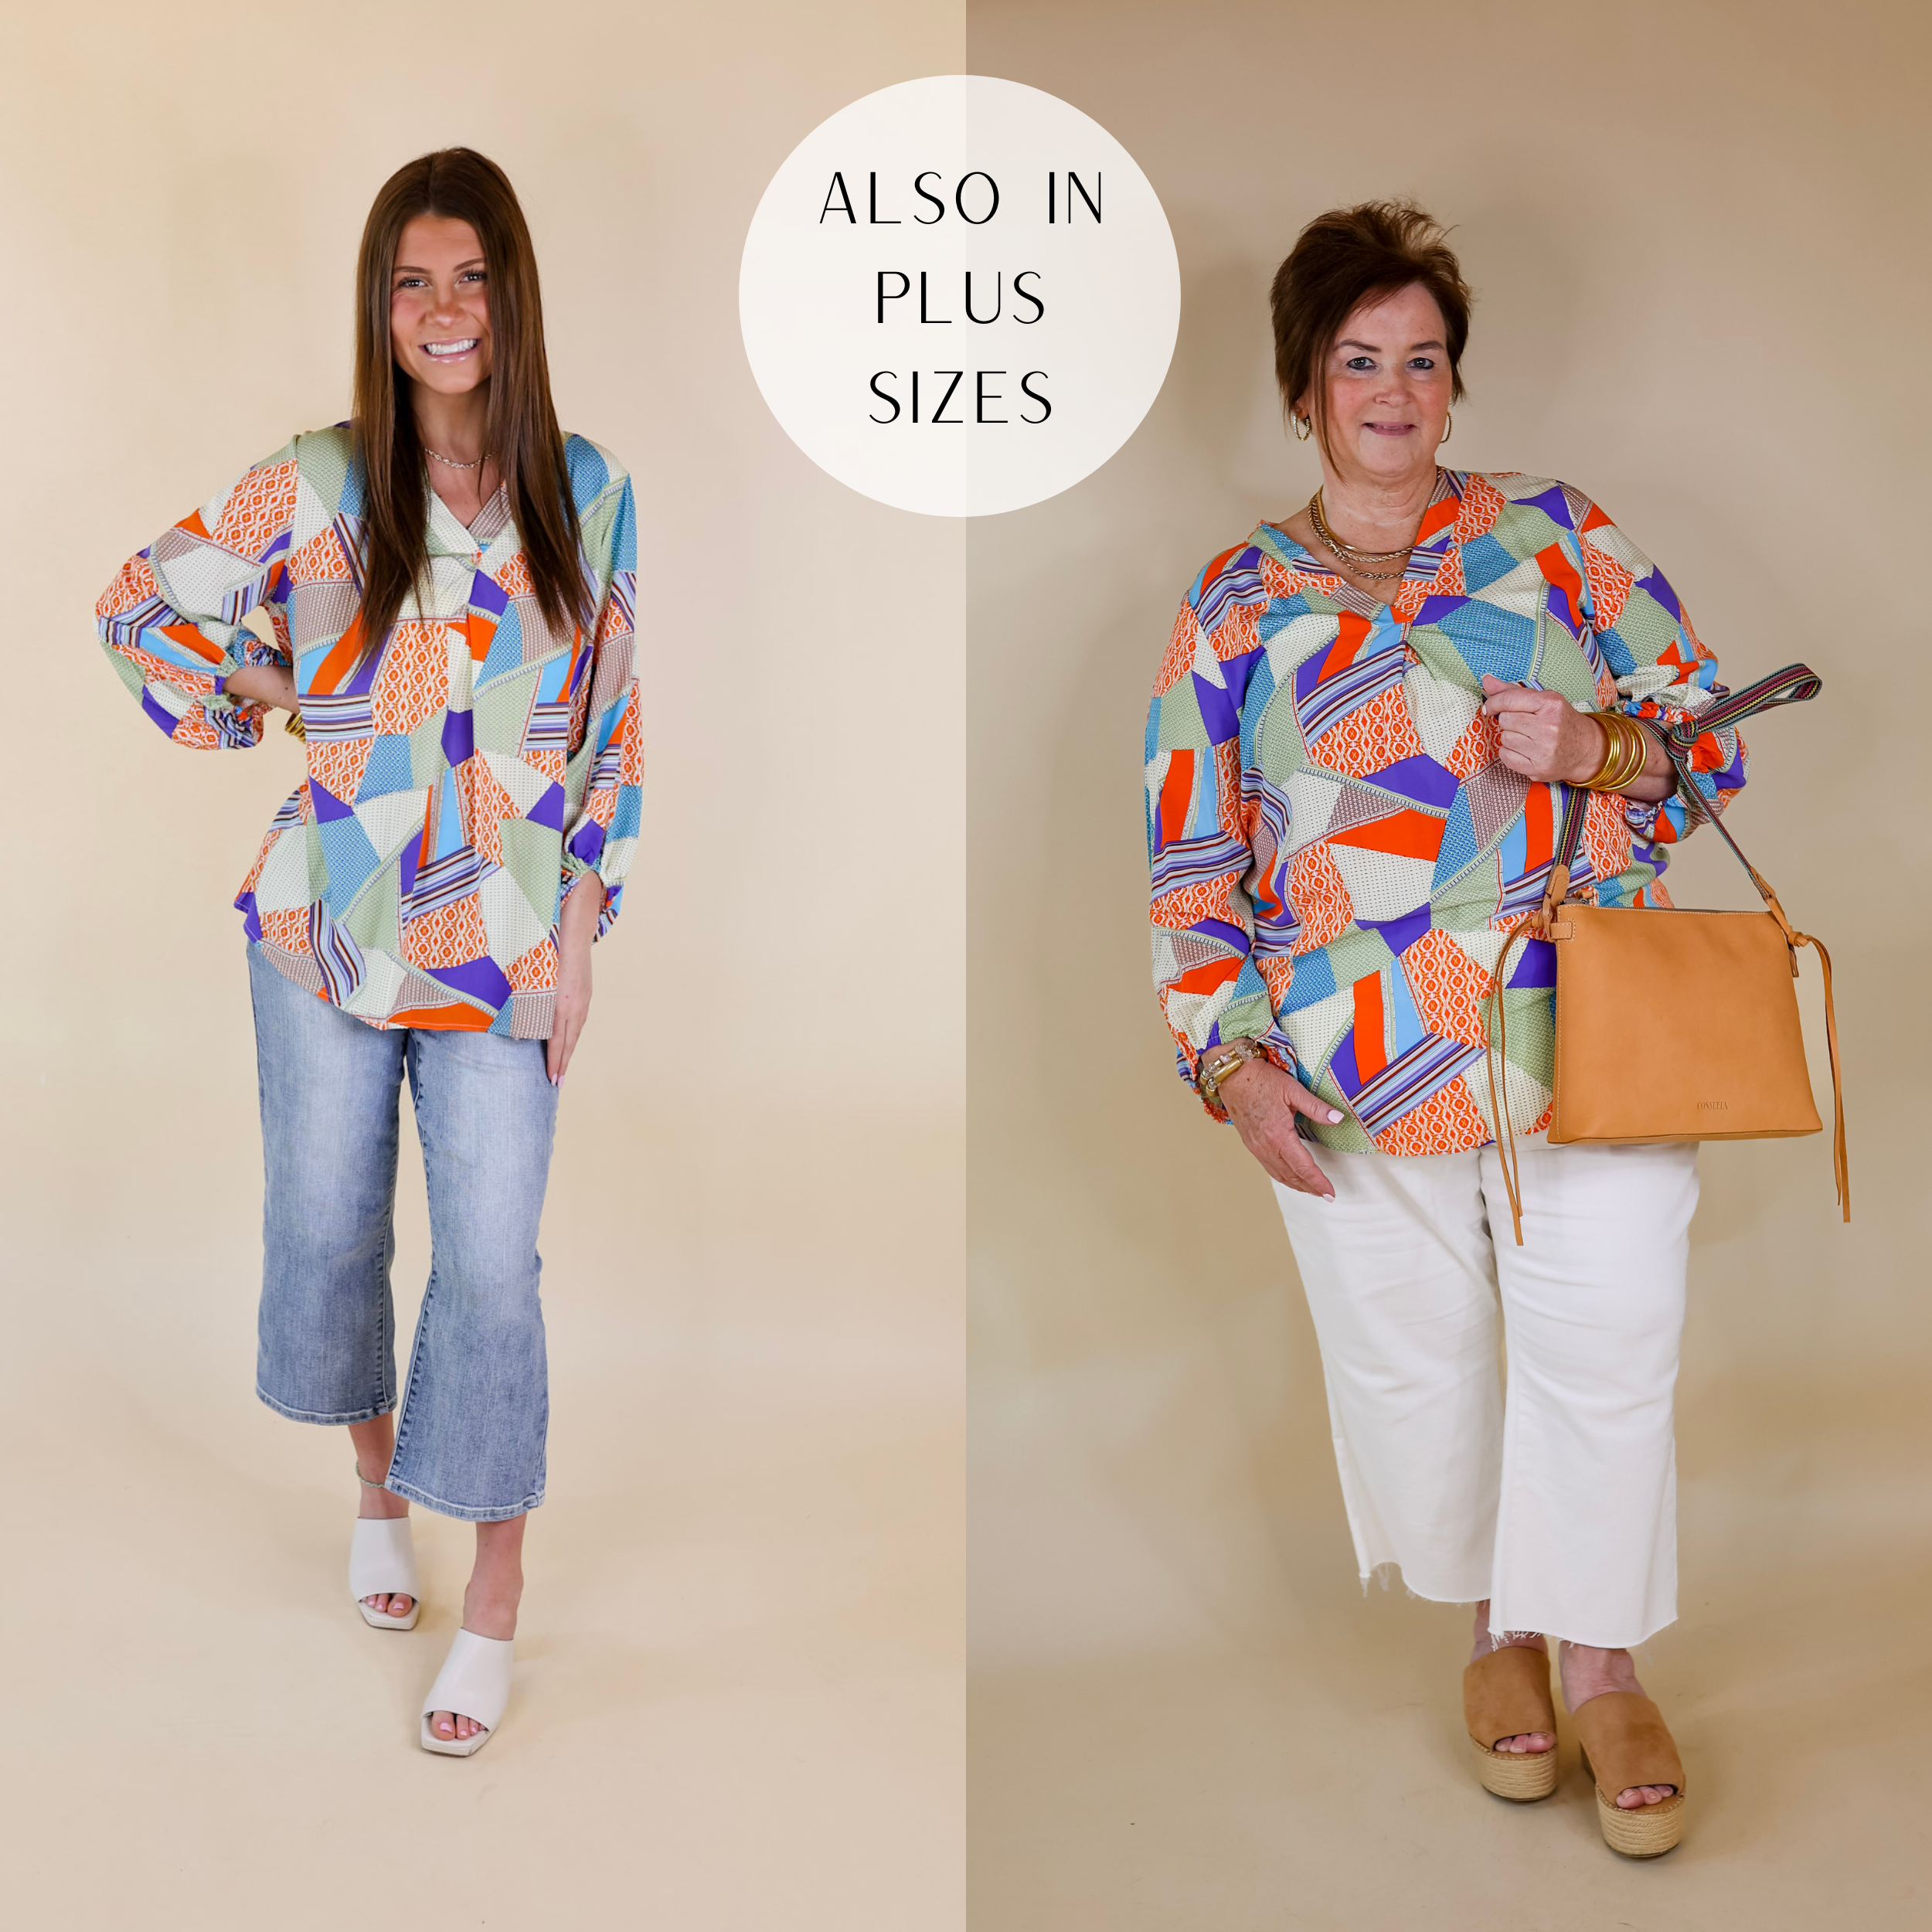 Models are wearing a 3/4 sleeve top with a mix patch print in green, orange, and blue. Size small model has this top paired with cropped jeans, ivory heels, and gold jewelry. Plus size model has it paired with cropped jeans, tan wedges, and gold jewelry.